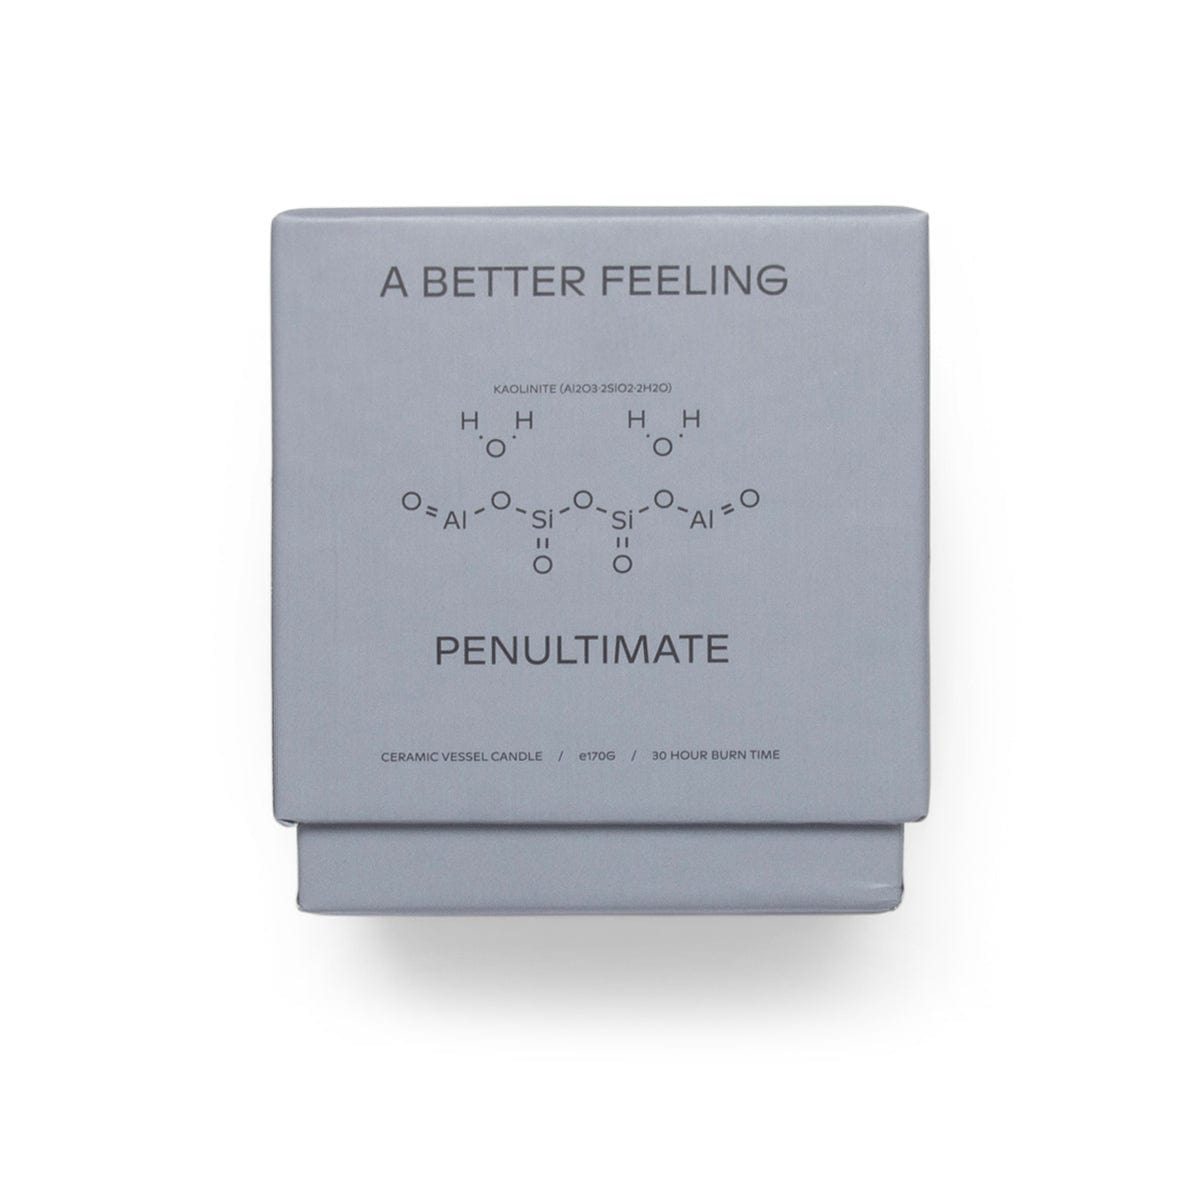 A Better Feeling Odds & Ends WHITE / O/S PENULTIMATE CERAMIC CANDLE